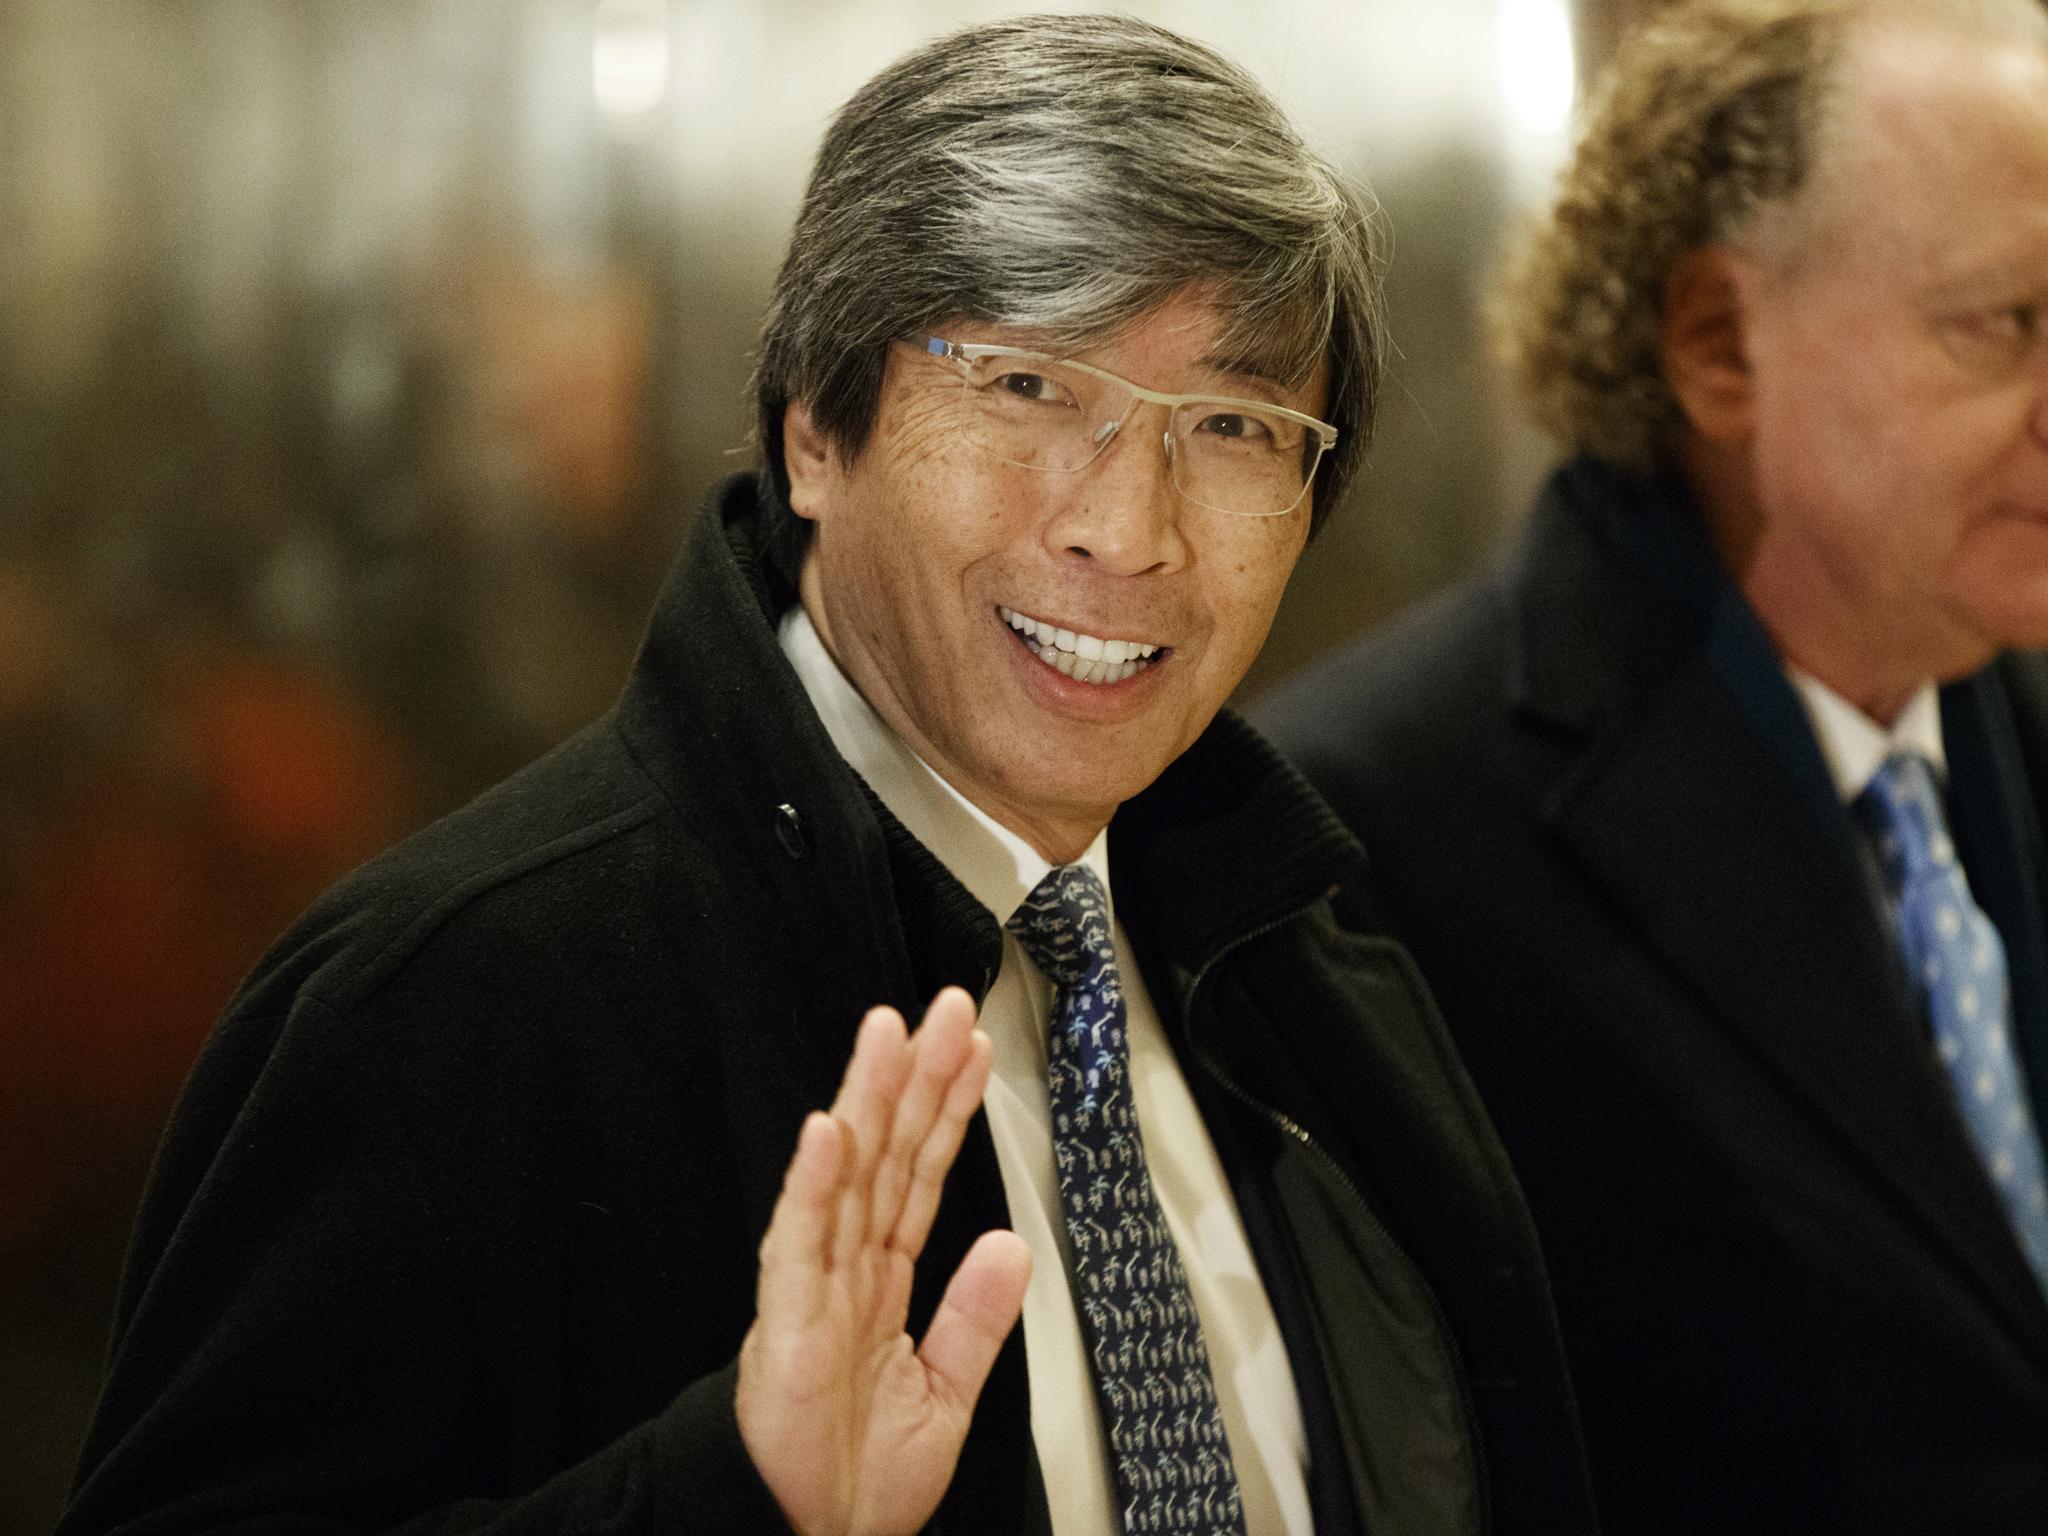 Pharmaceuticals billionaire Dr Patrick Soon-Shiong waves as he arrives in the lobby of Trump Tower 10 January 2017 for a meeting with the President-elect Donald Trump.